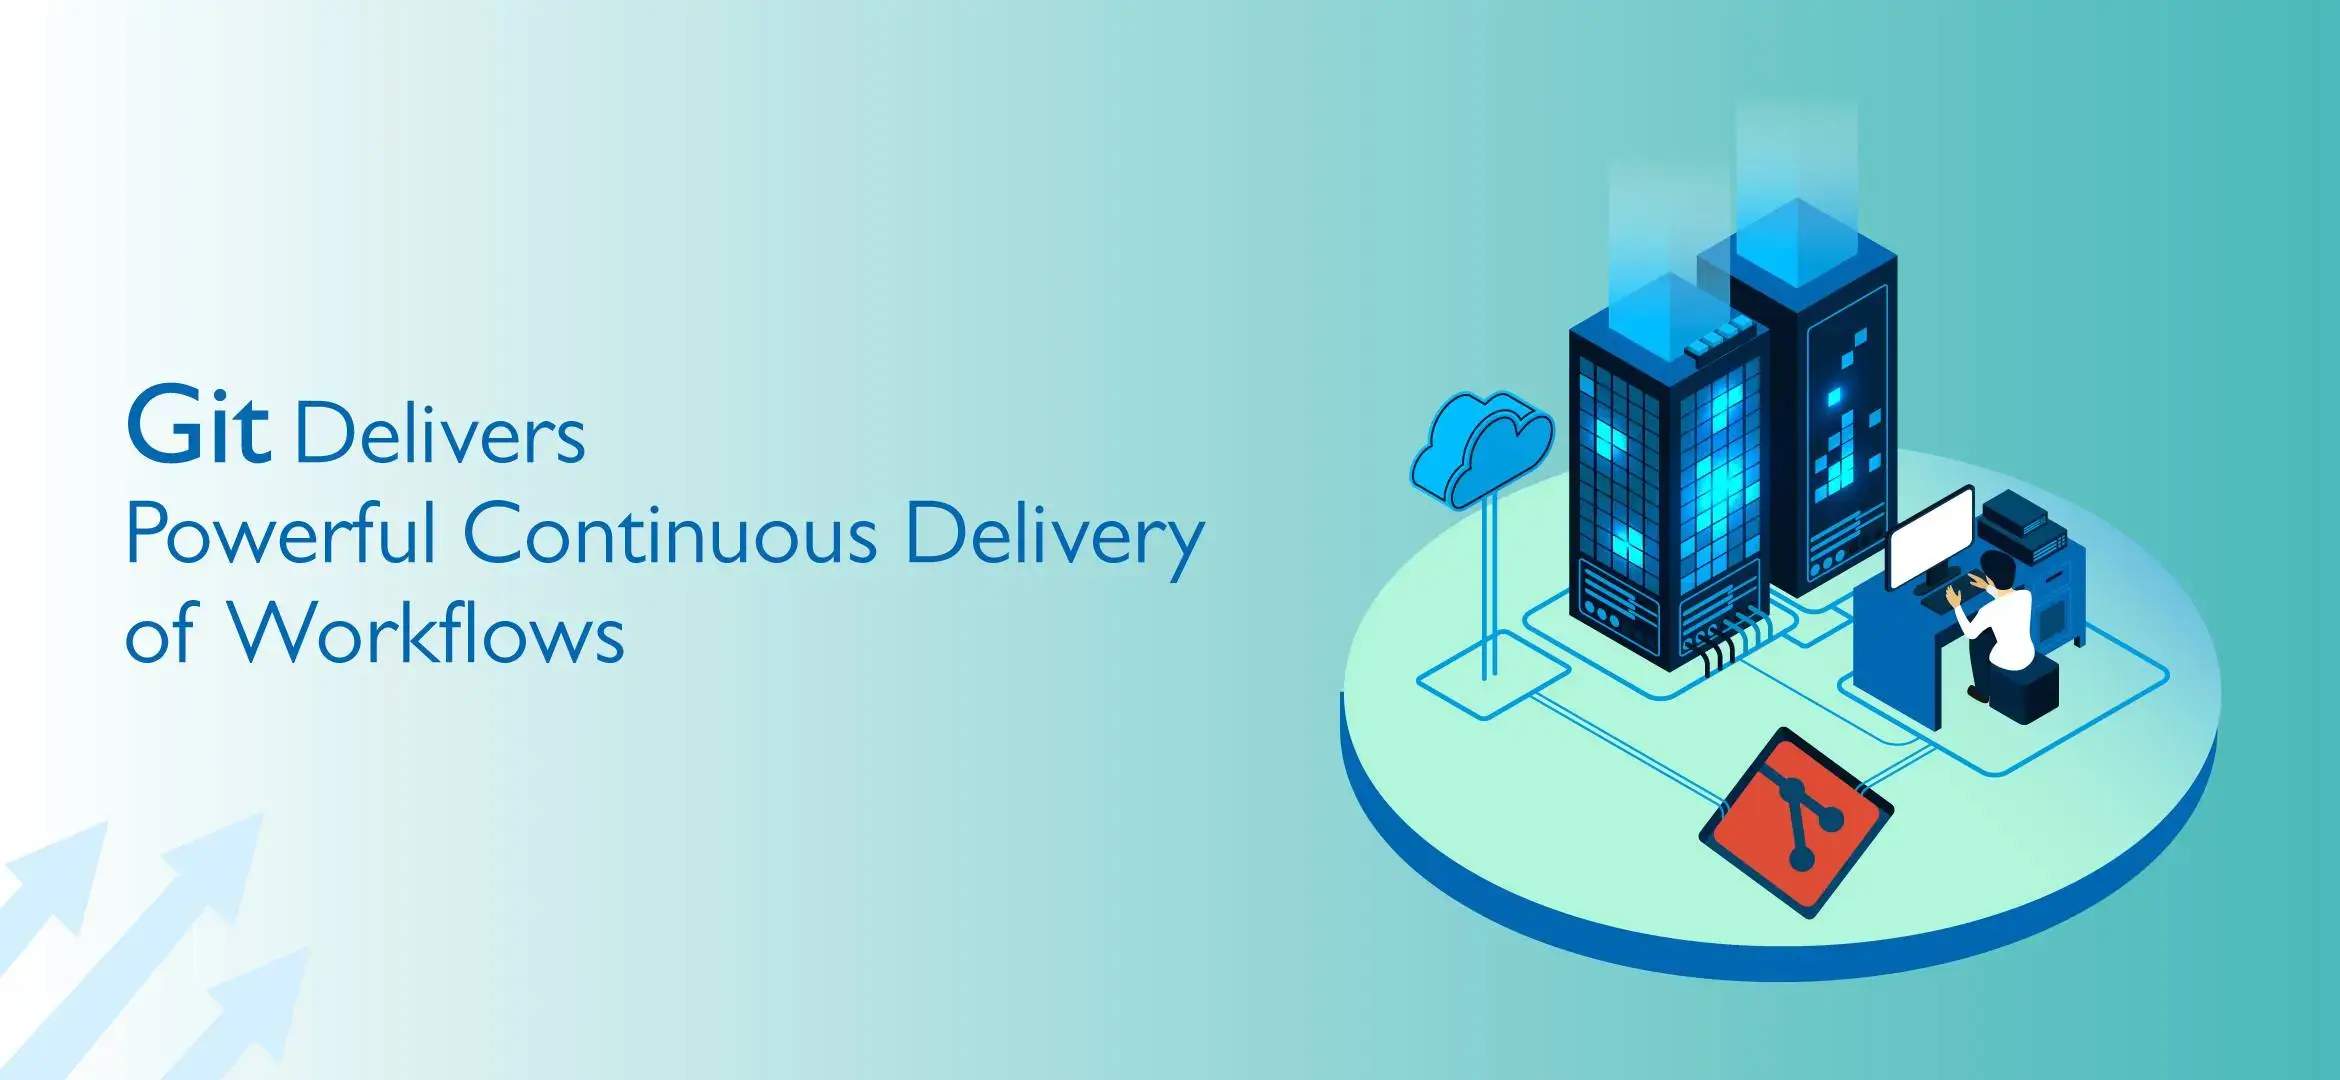 Git Delivers Powerful Continuous Delivery of Workflows